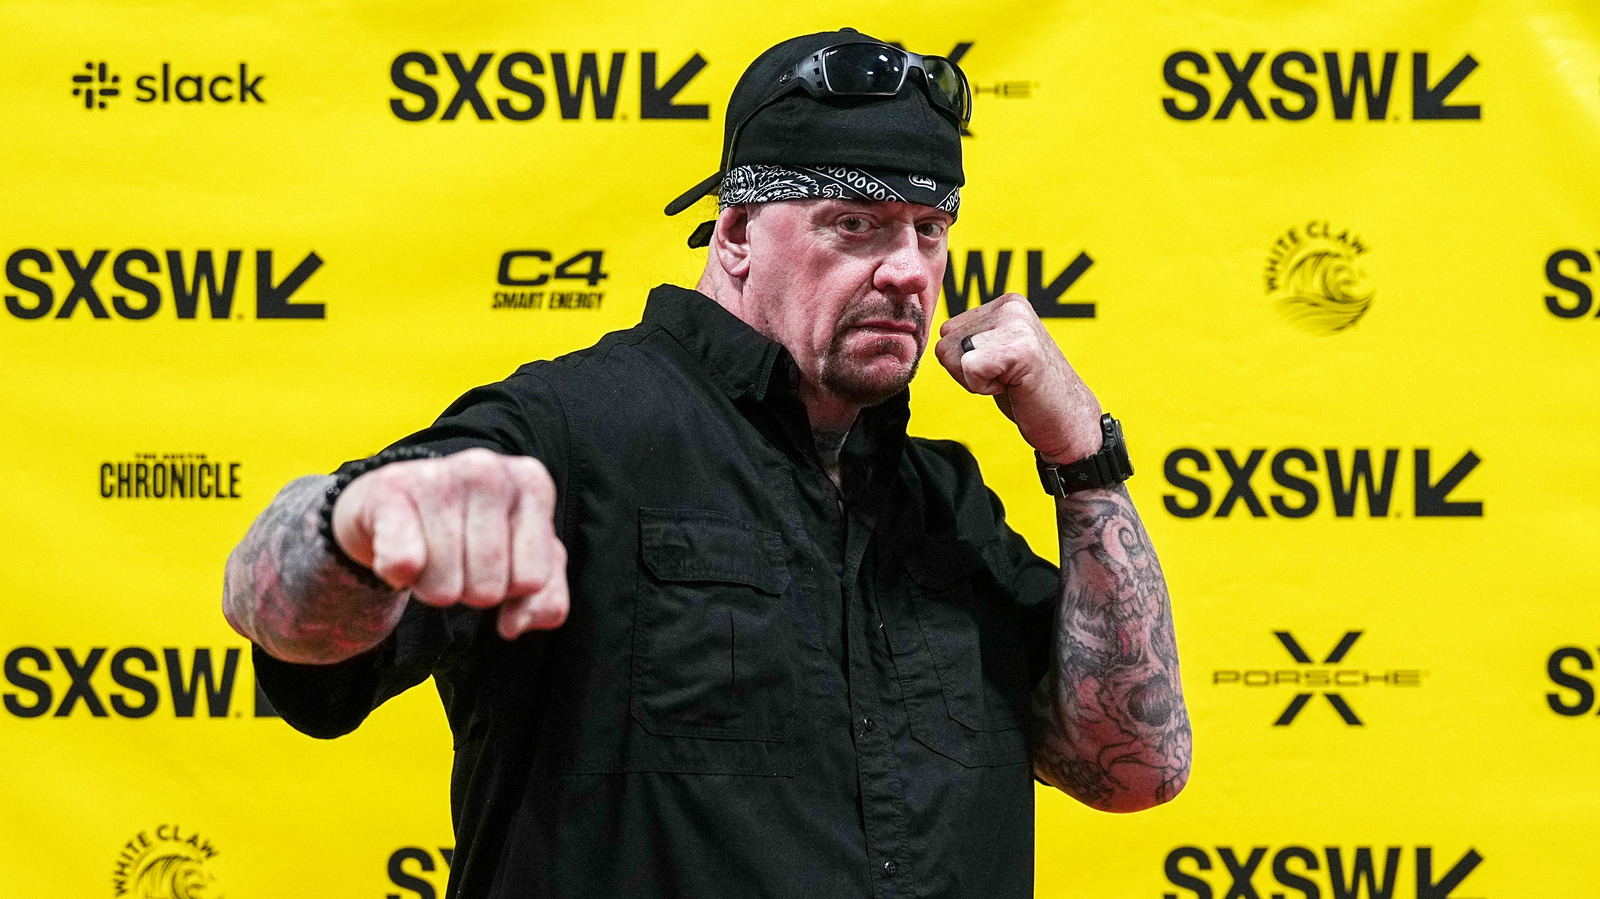 The Undertaker Reflects On WWE's Push For More PG Product